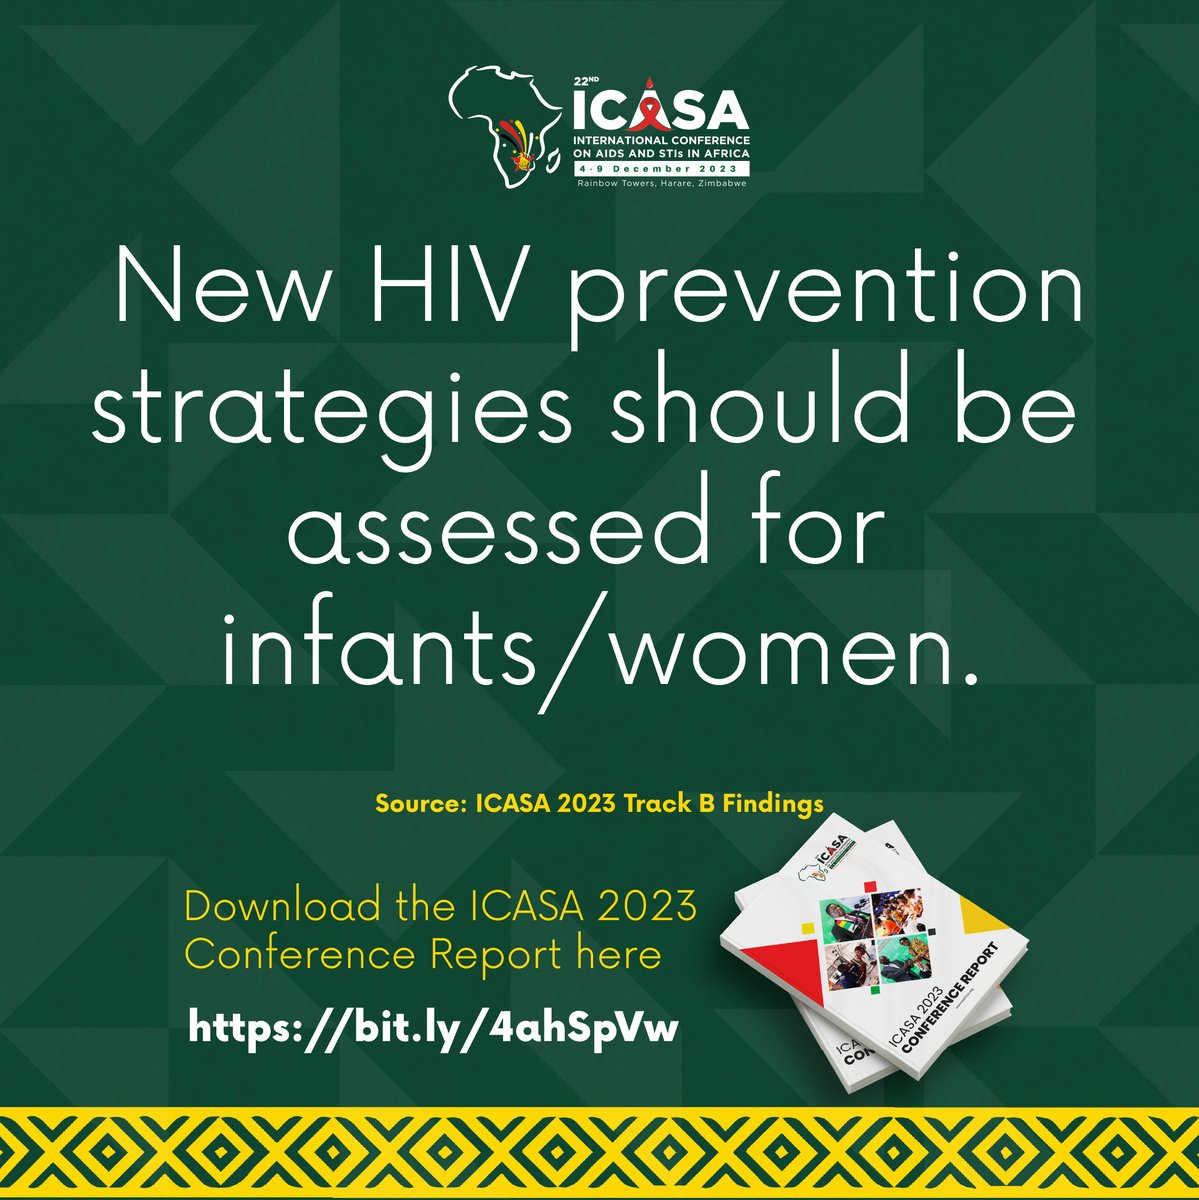 More studies need to be conducted to know how to better prevent new #HIV infections in this population and how #PrEP should be considered for pregnant and breastfeeding women. Download the report here bit.ly/4ahSpVw #ICASA2023Highlight